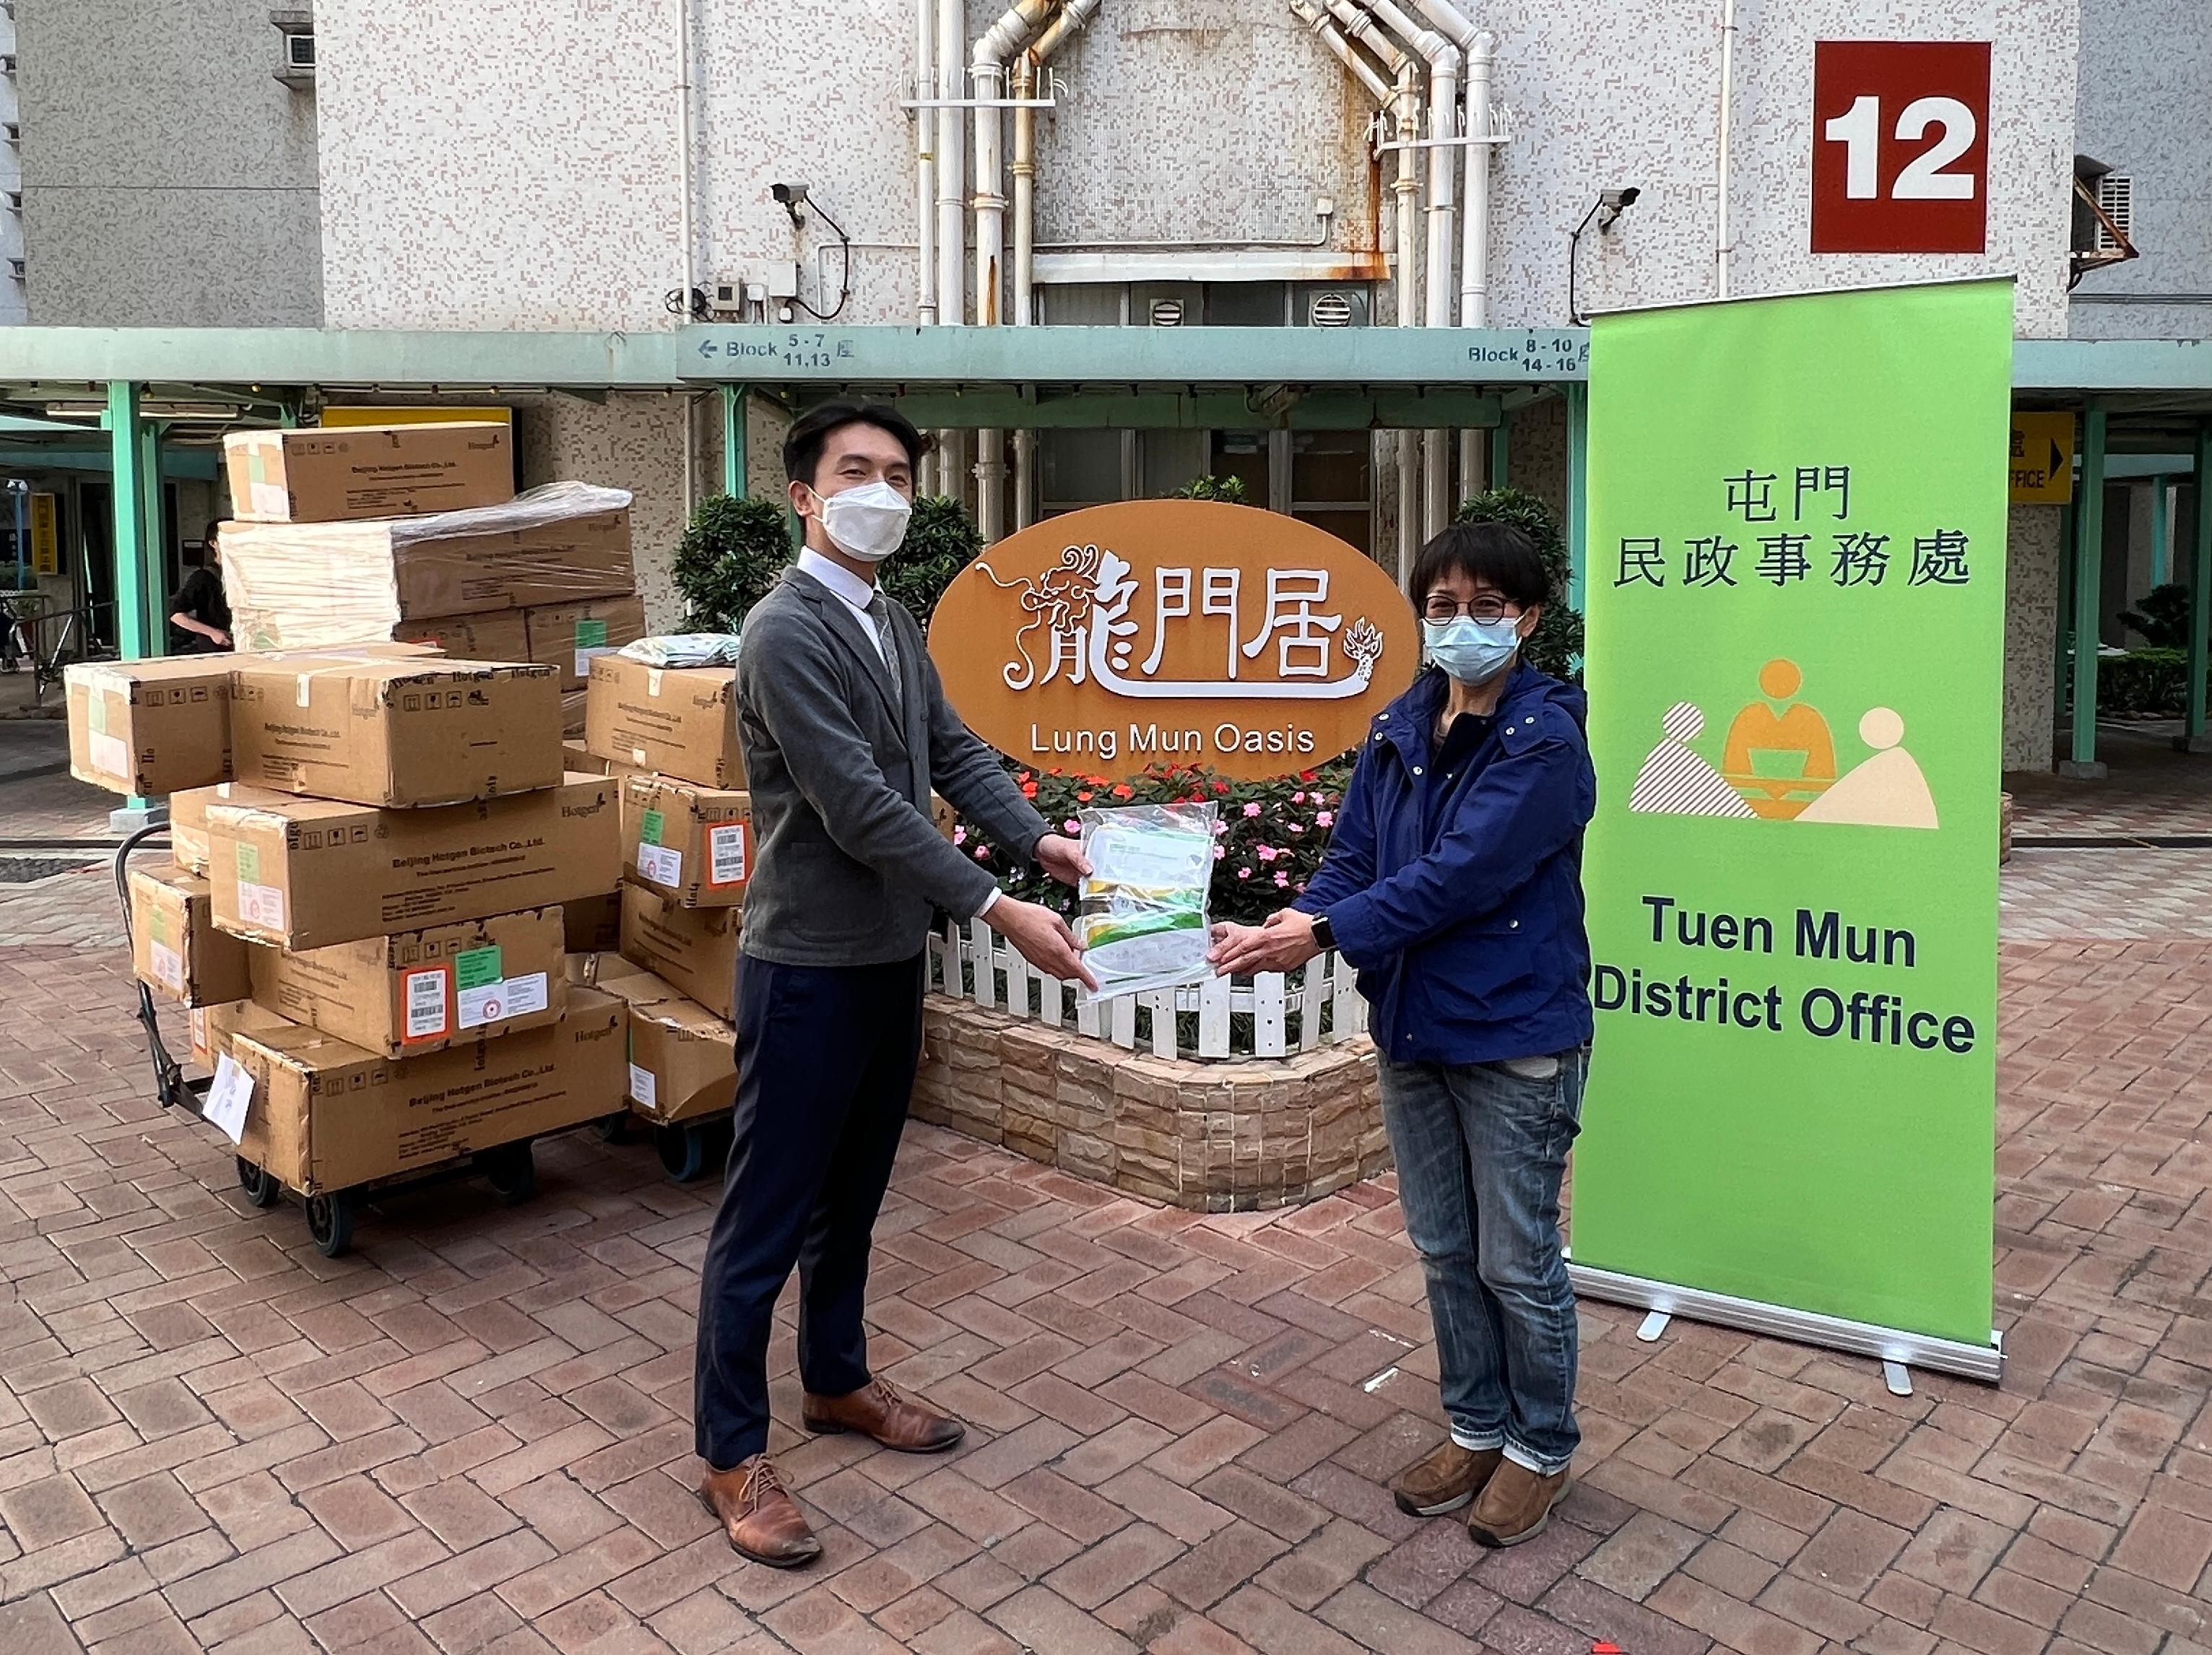 The Tuen Mun District Office today (March 10) distributed COVID-19 rapid test kits to households, cleansing workers and property management staff living and working in Lung Mun Oasis for voluntary testing through the property management company.